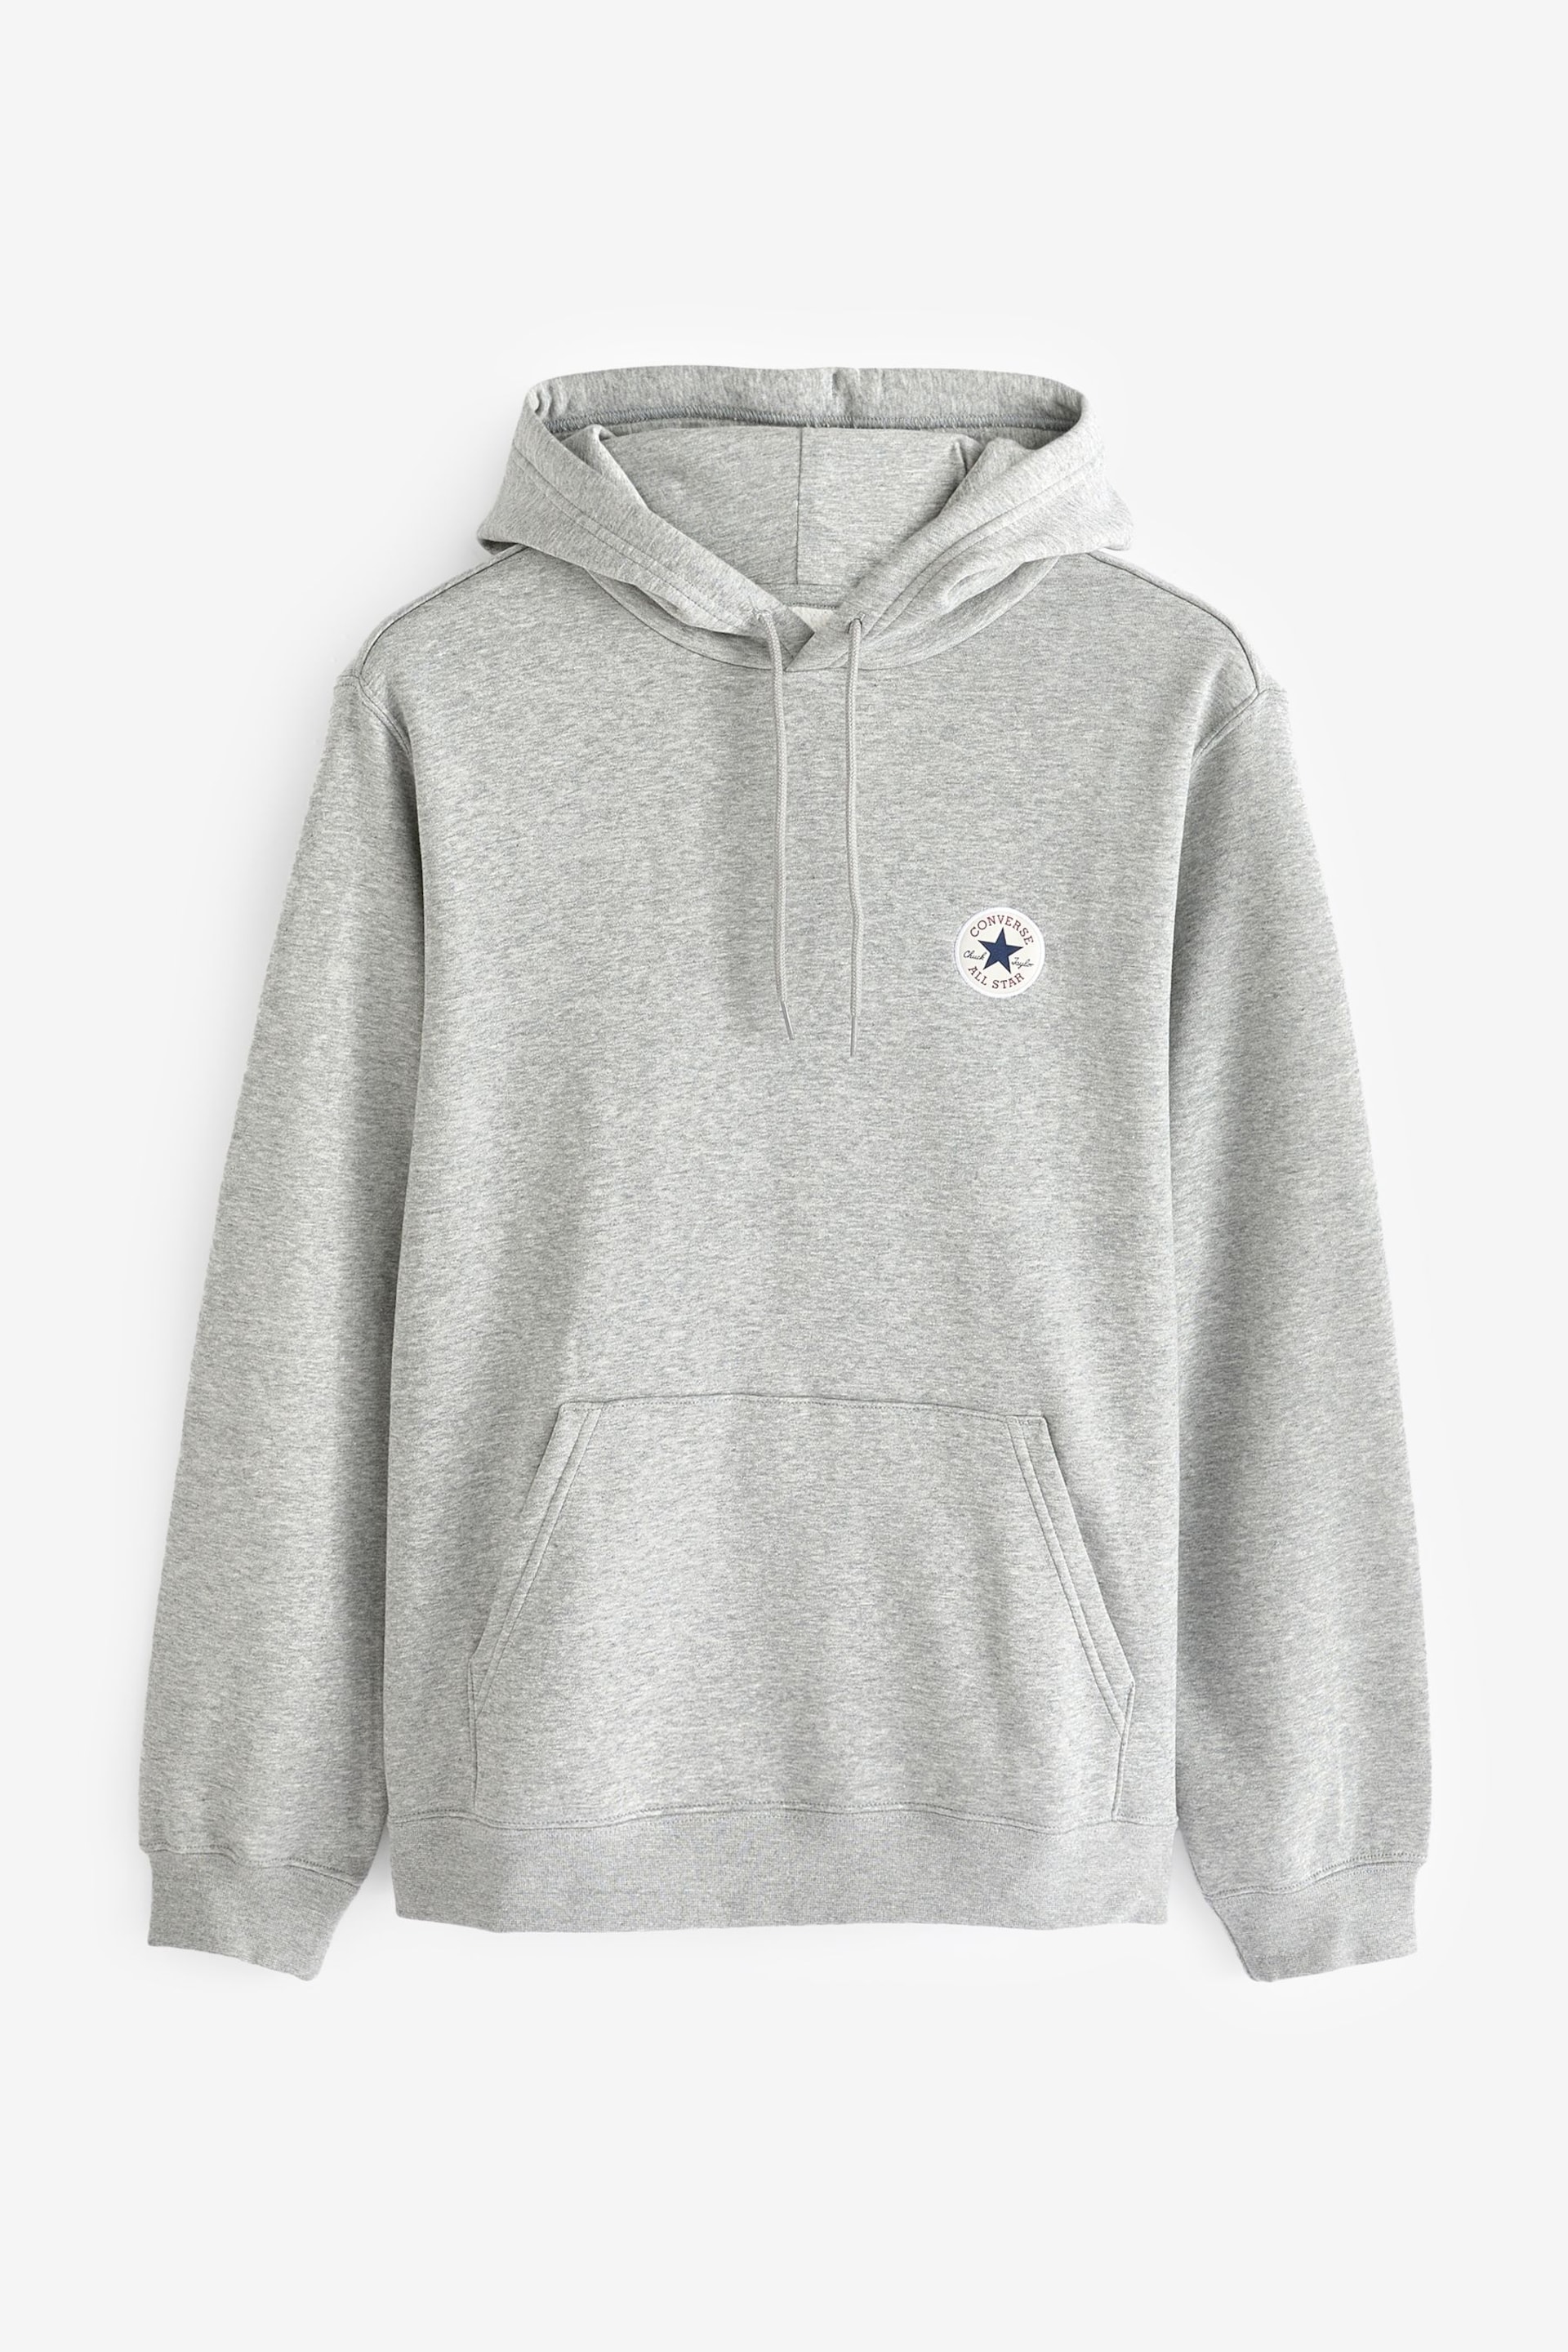 Converse Grey Chuck Patch Hoodie - Image 1 of 4